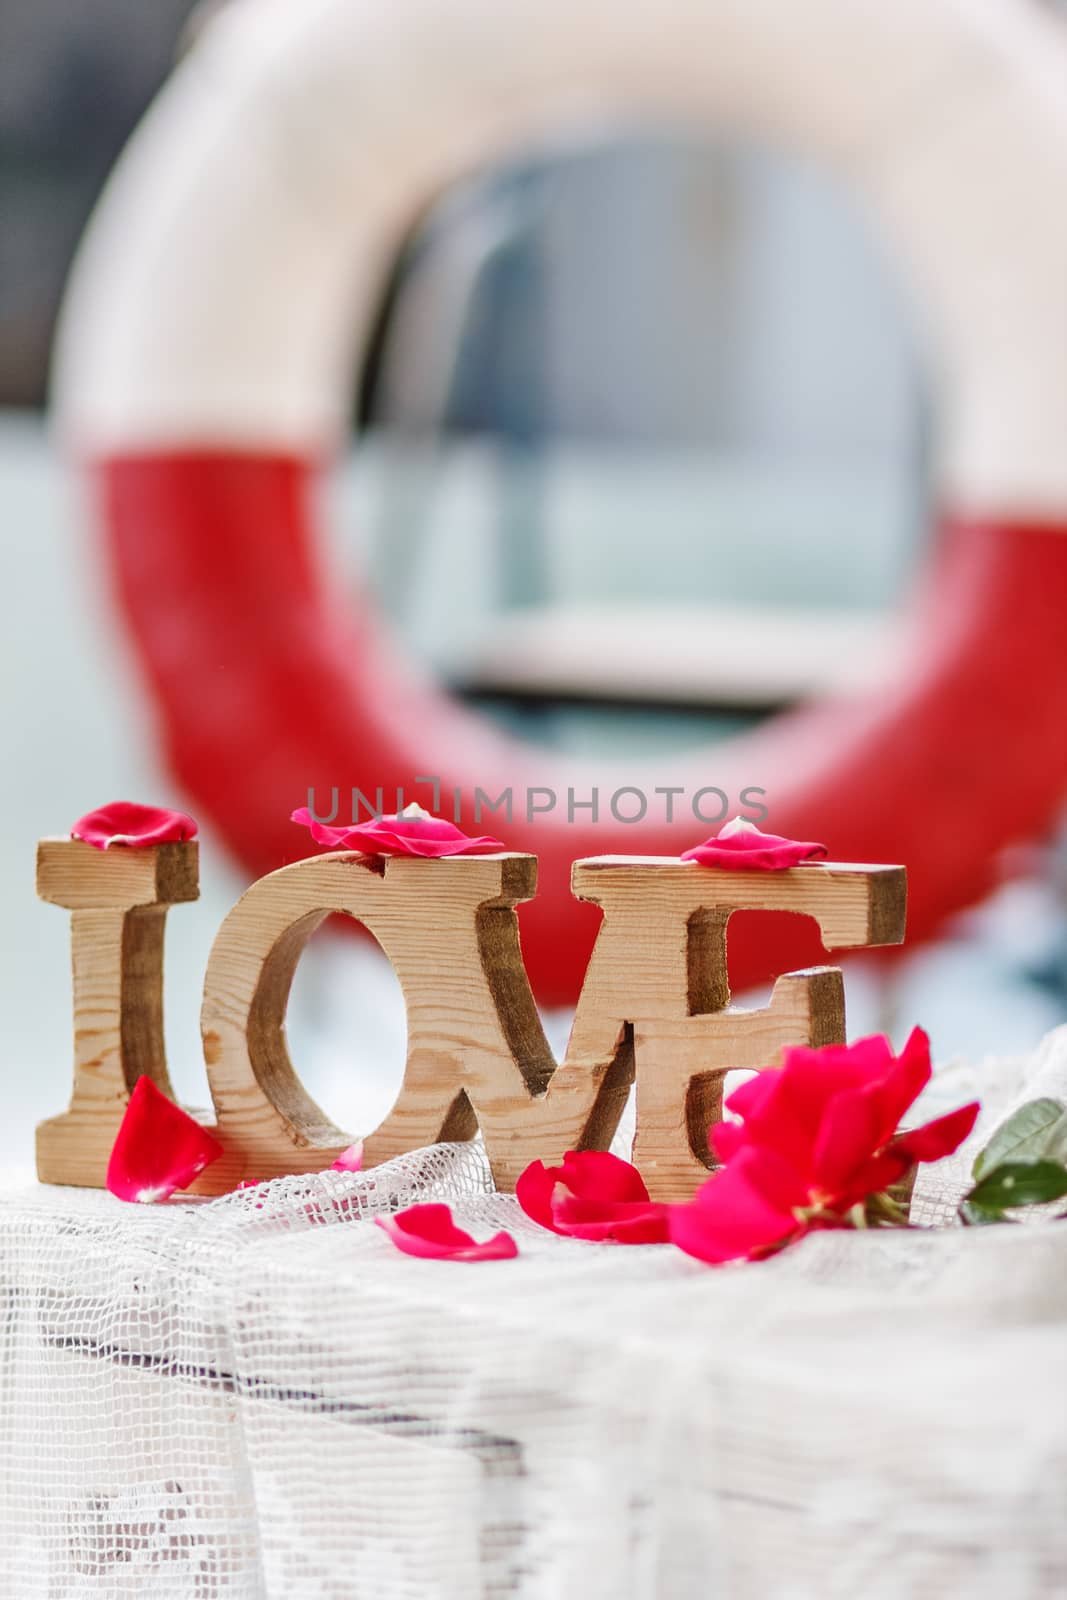 Love saves the world. Valentine's Day. Carved wood word "Love" among pink rose petals on the background of a life buoy